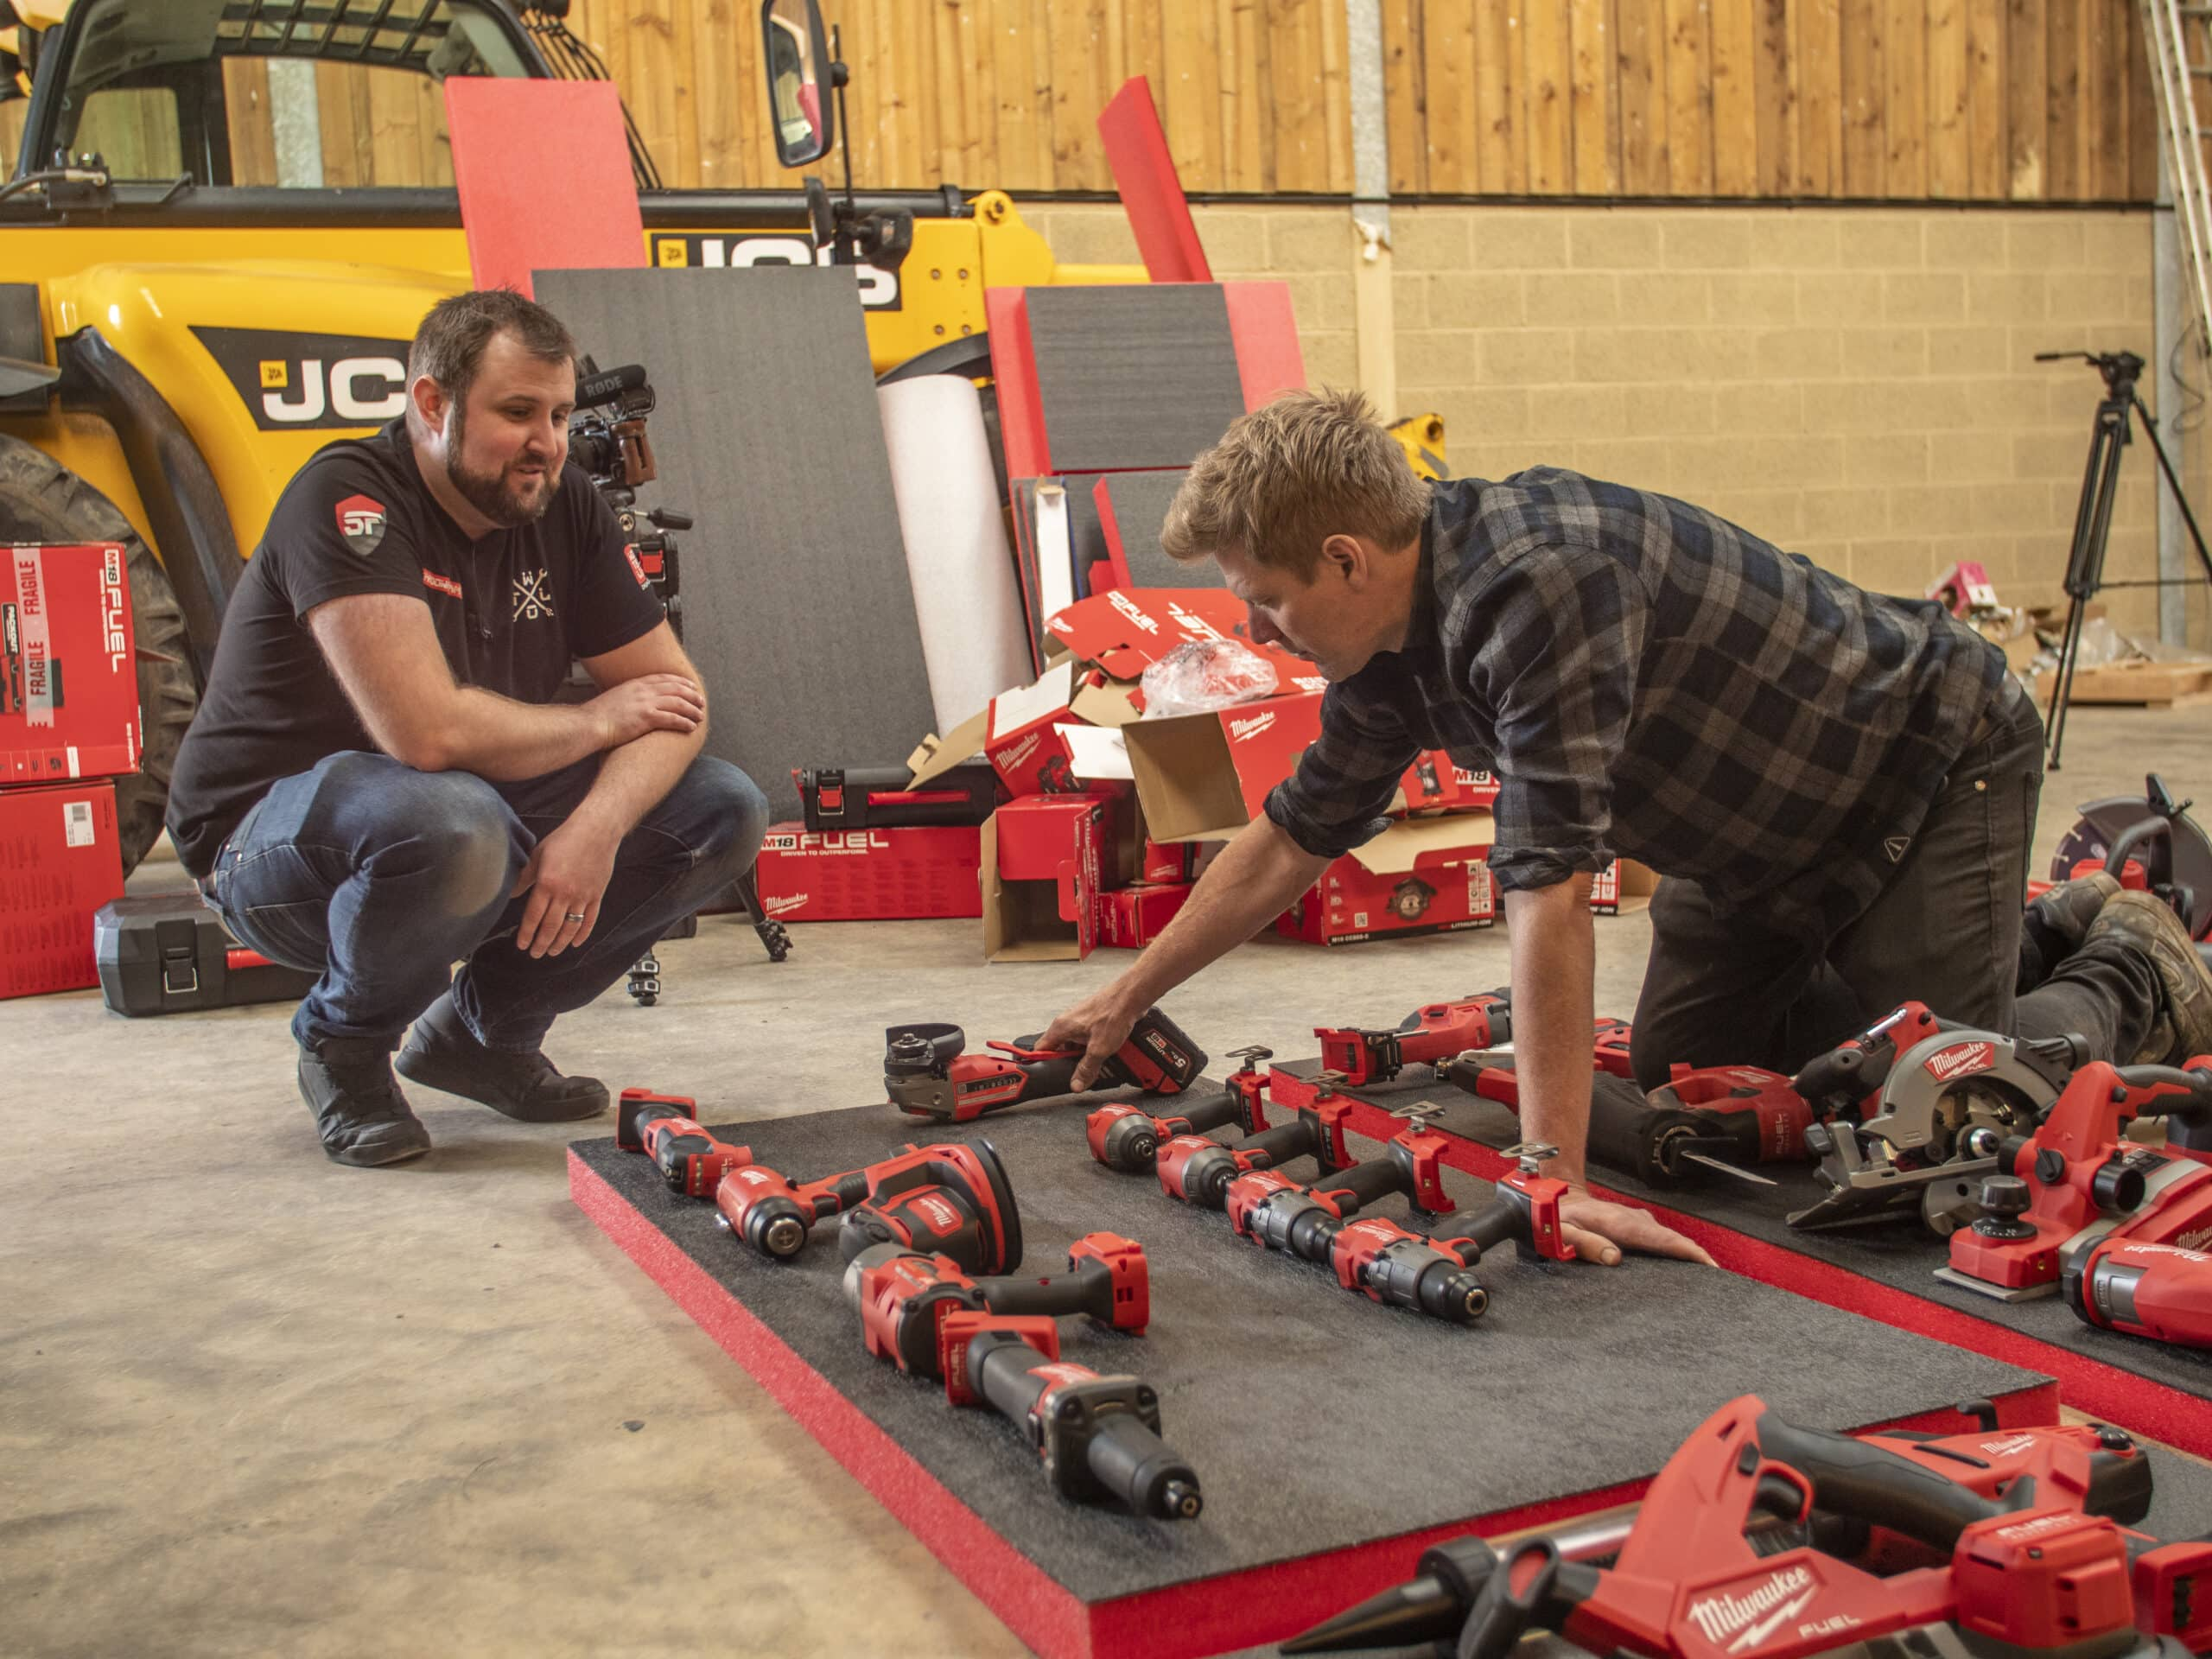 Colin planning the layout of his tool wall storage by laying the Milwaukee Power tools out on the foam